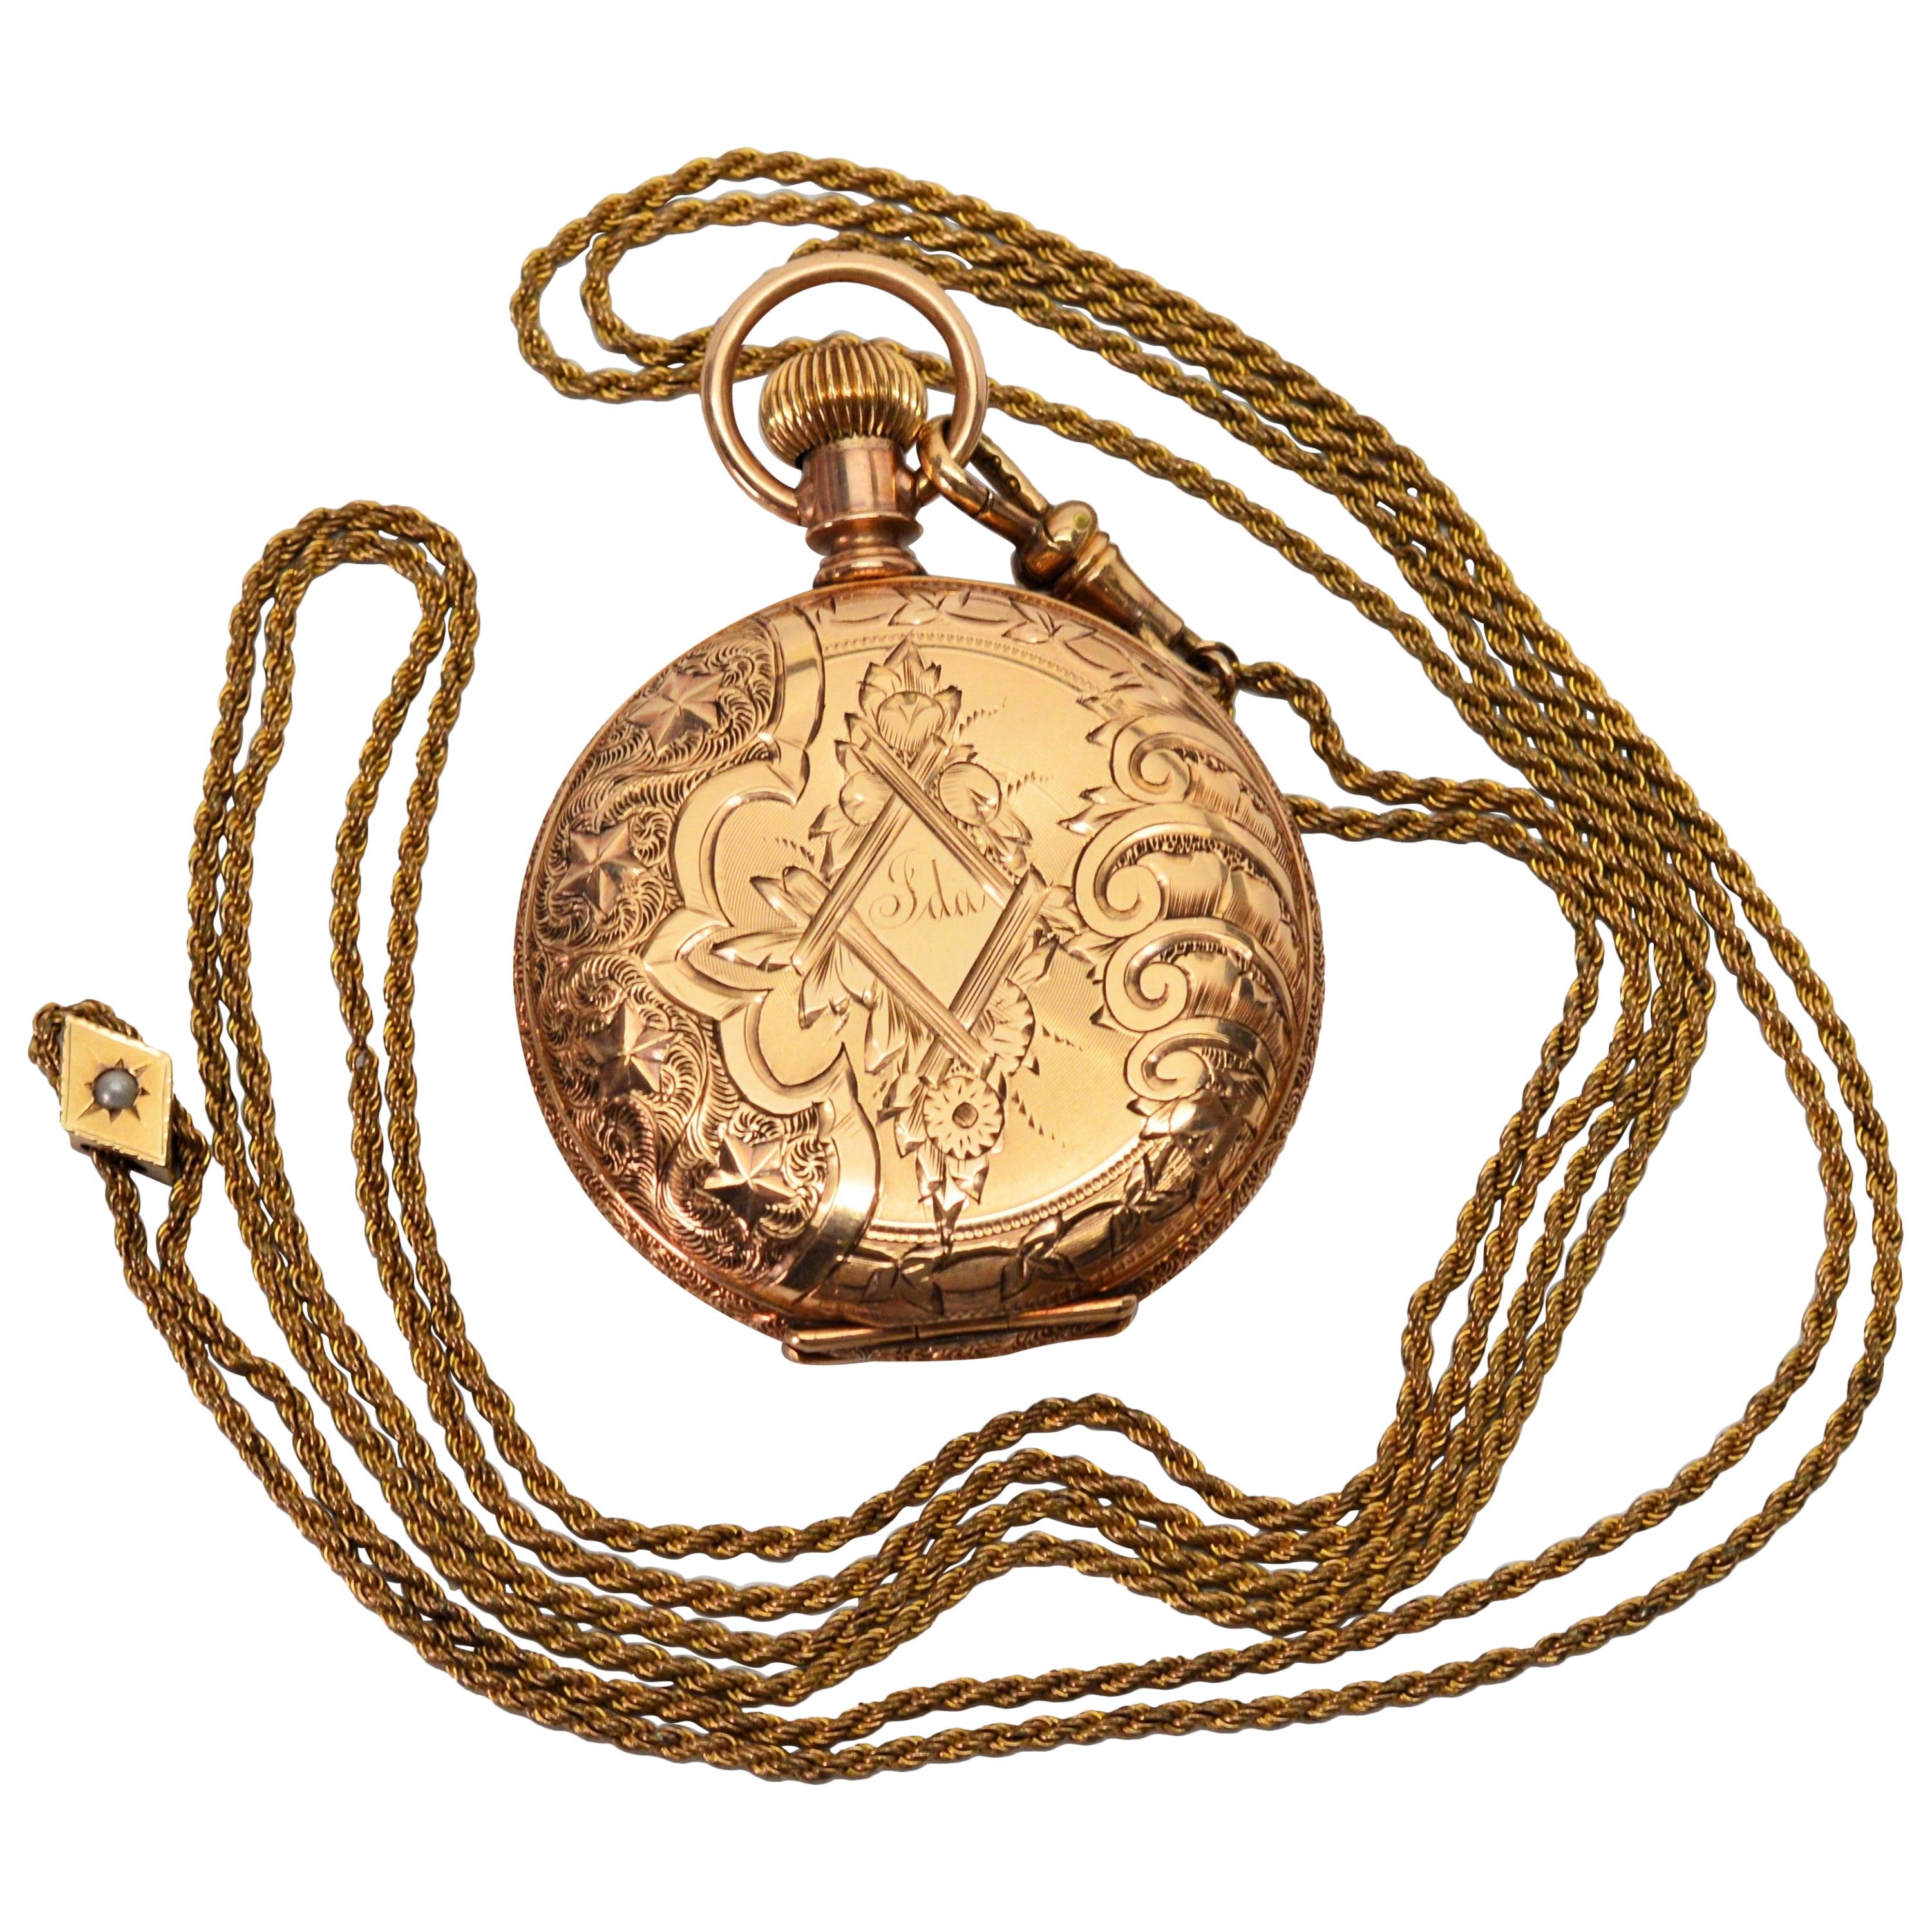 Elgin National Watch Co Ladies Antique Pocket Watch with Chain Pendant Necklace